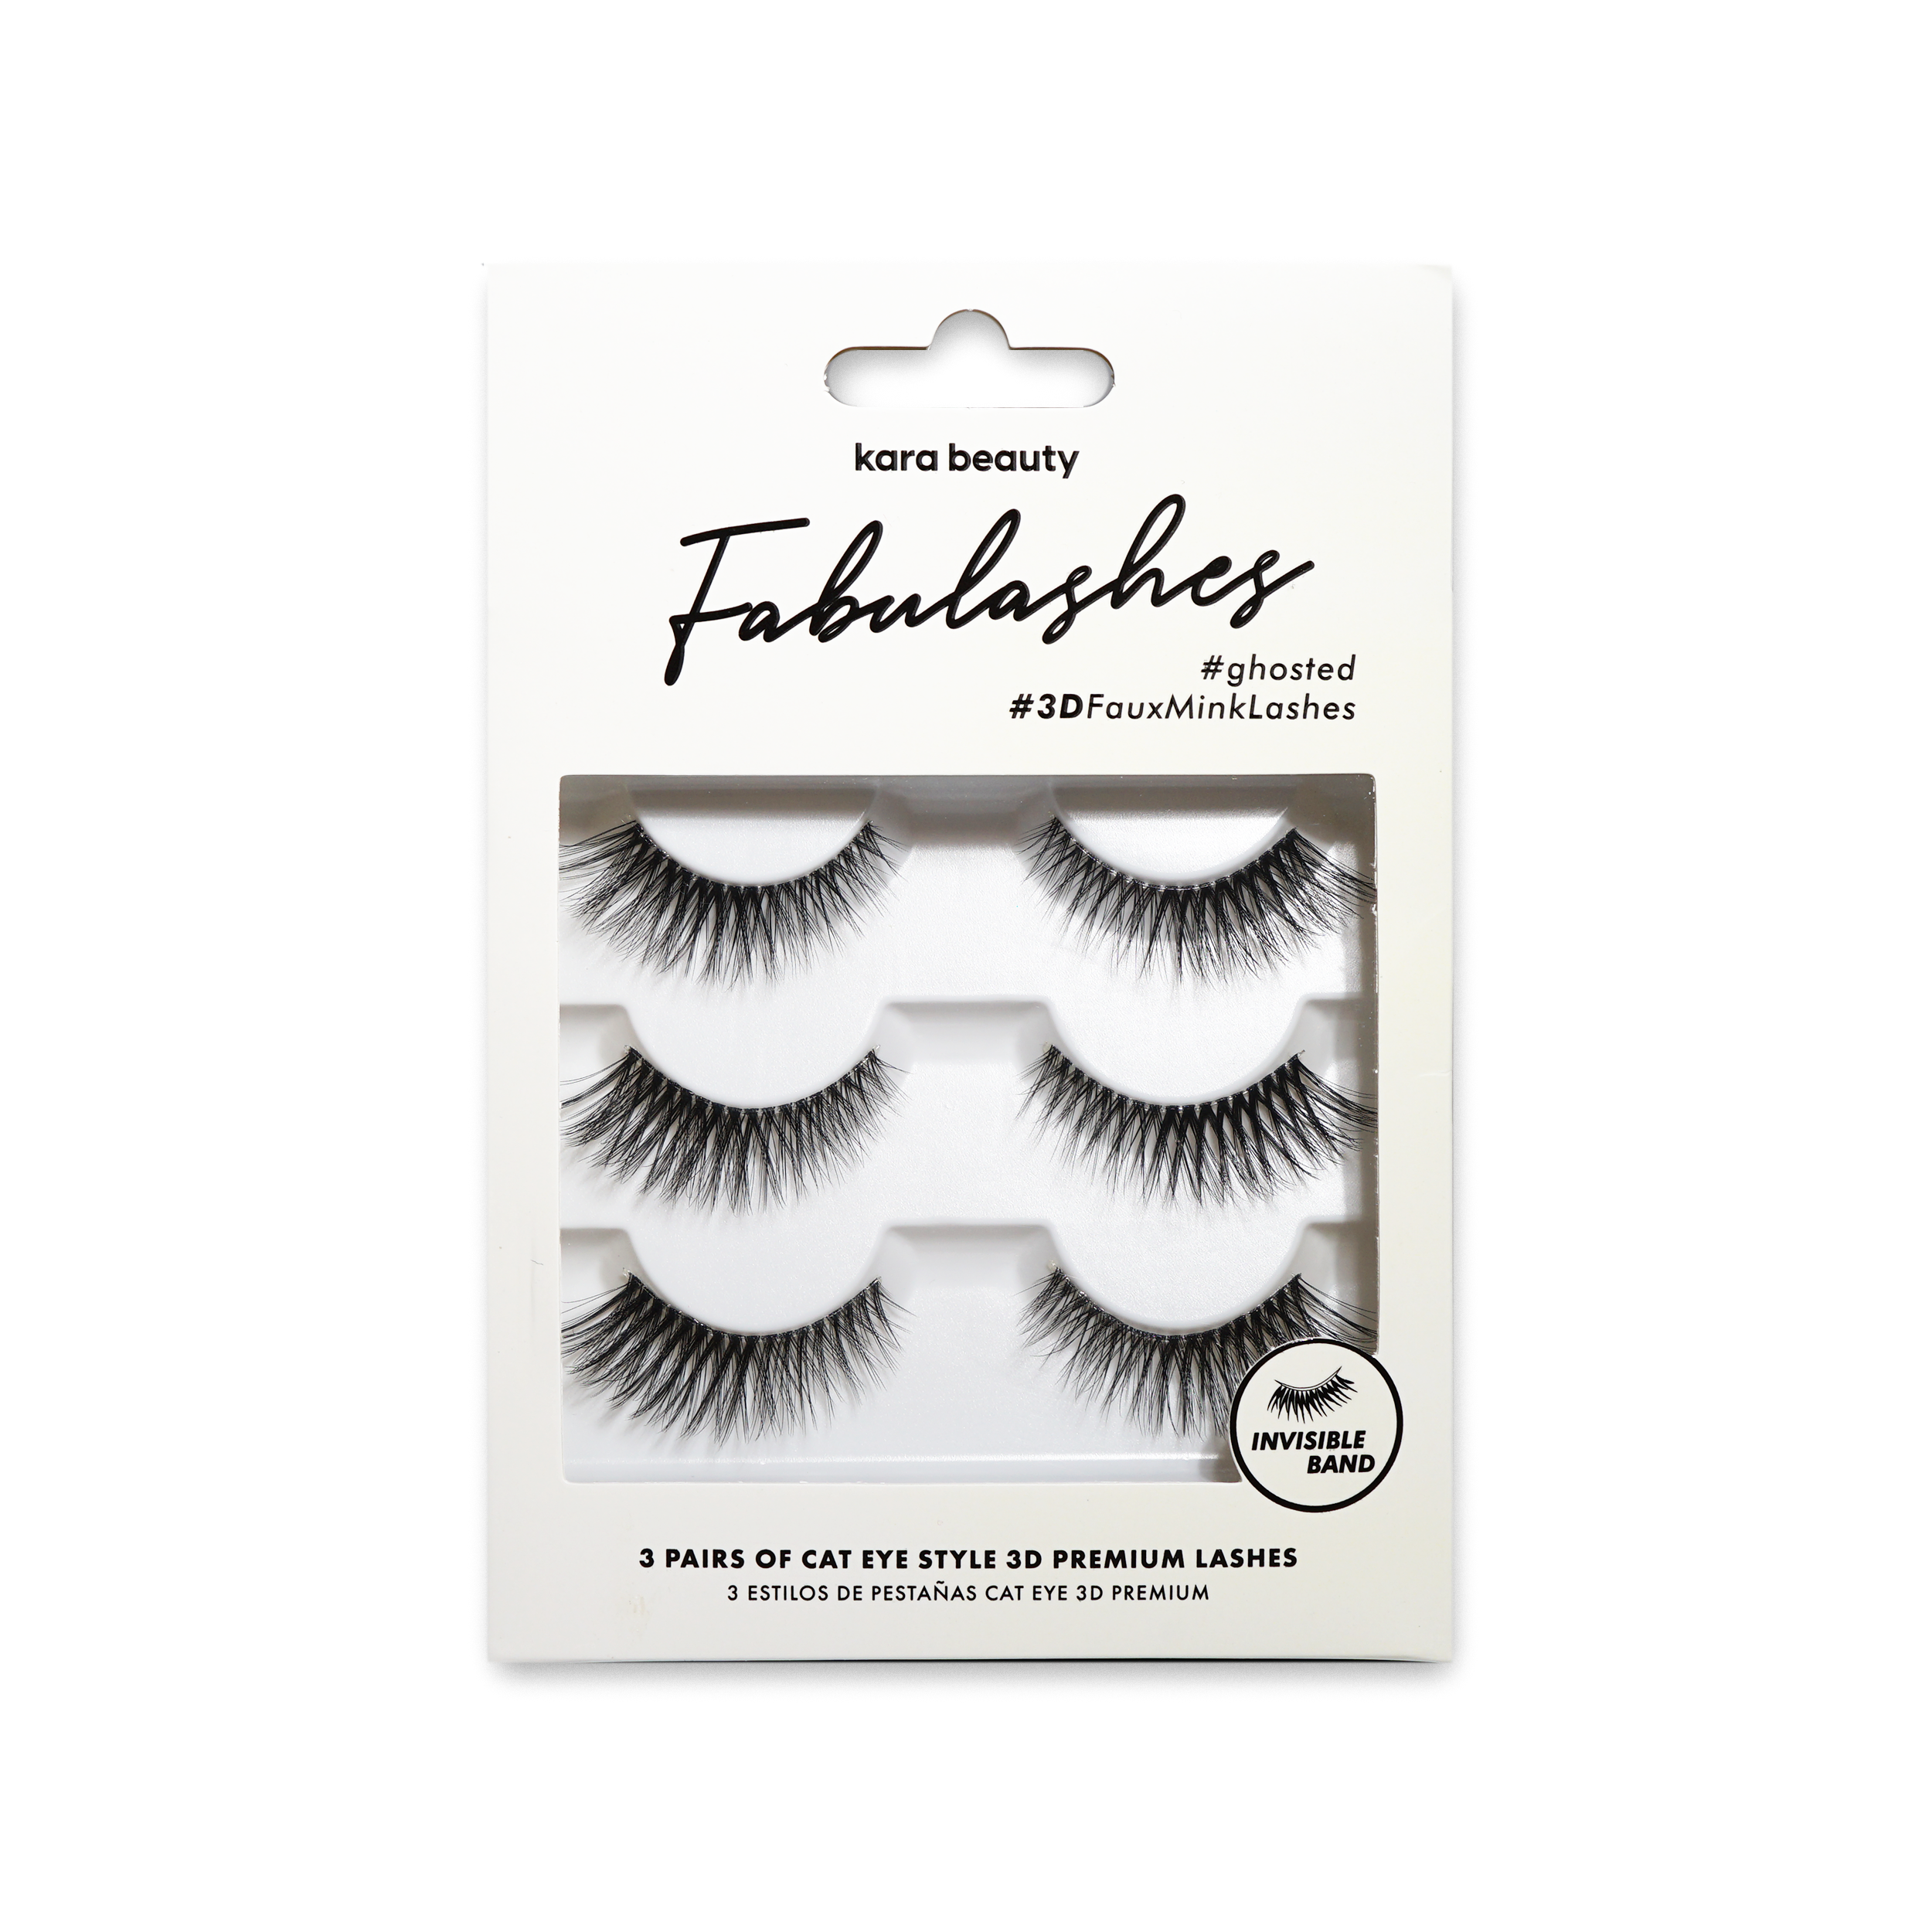 IBLK301 GHOSTED Invisible Band 3 Pack Fabulashes 3D Faux Mink Lashes